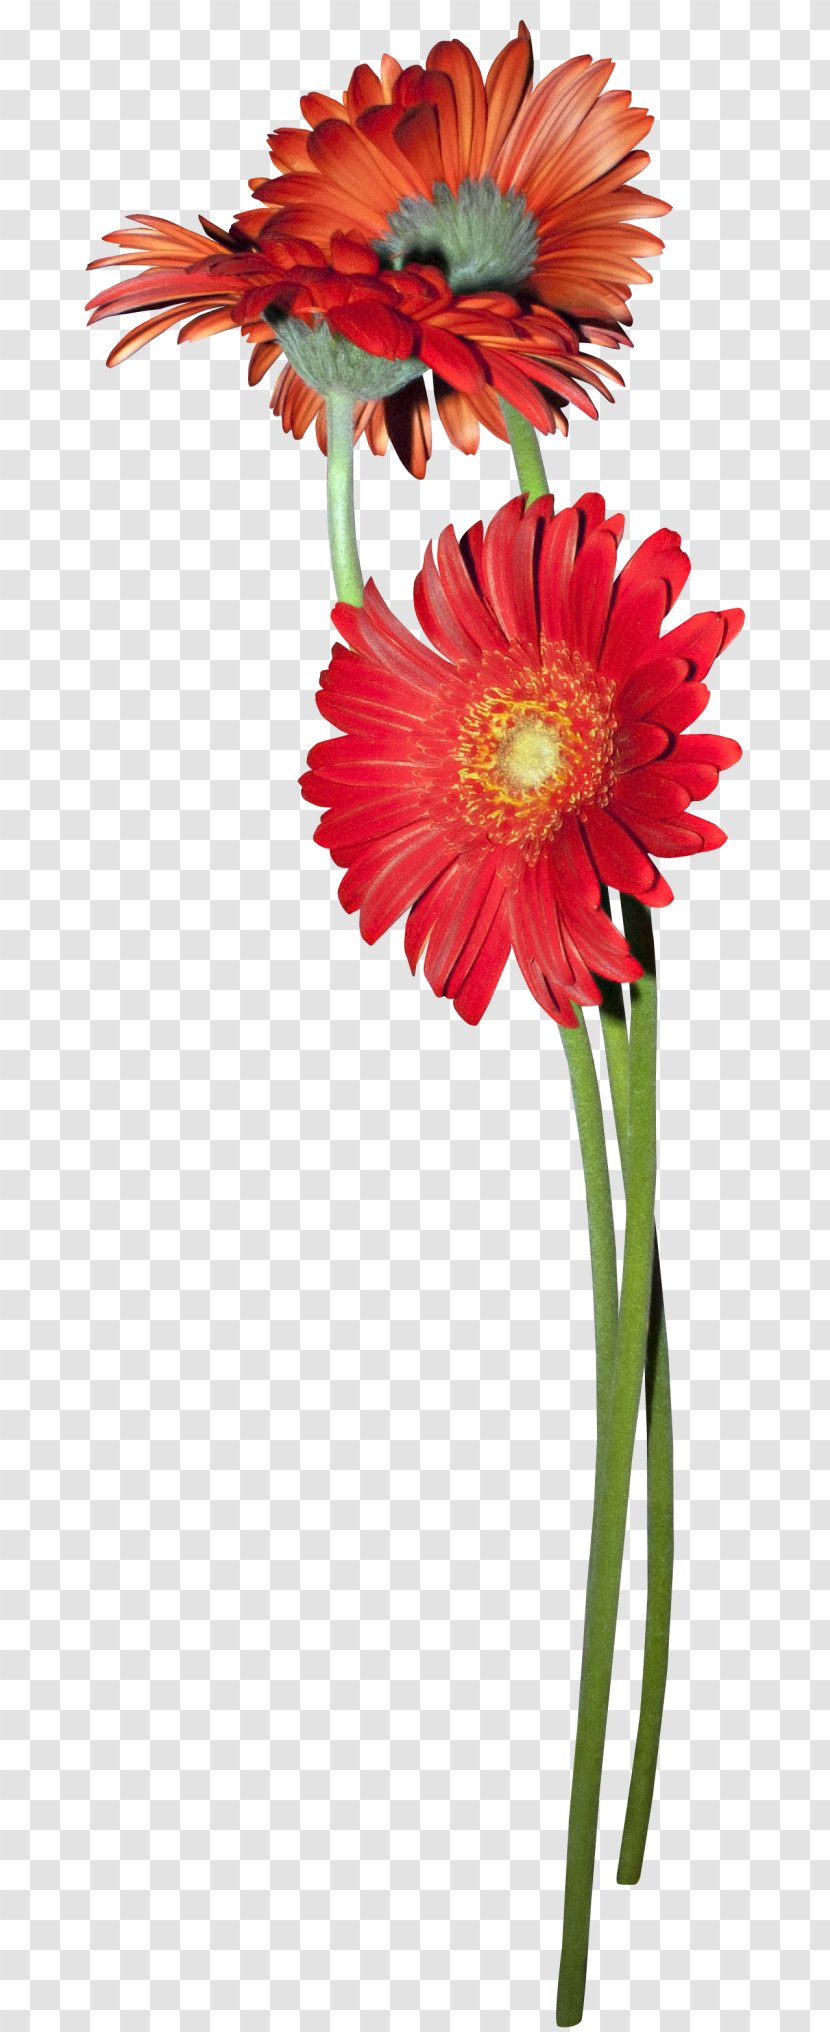 Cut Flowers Transvaal Daisy Clip Art - Red - Flower Transparent PNG